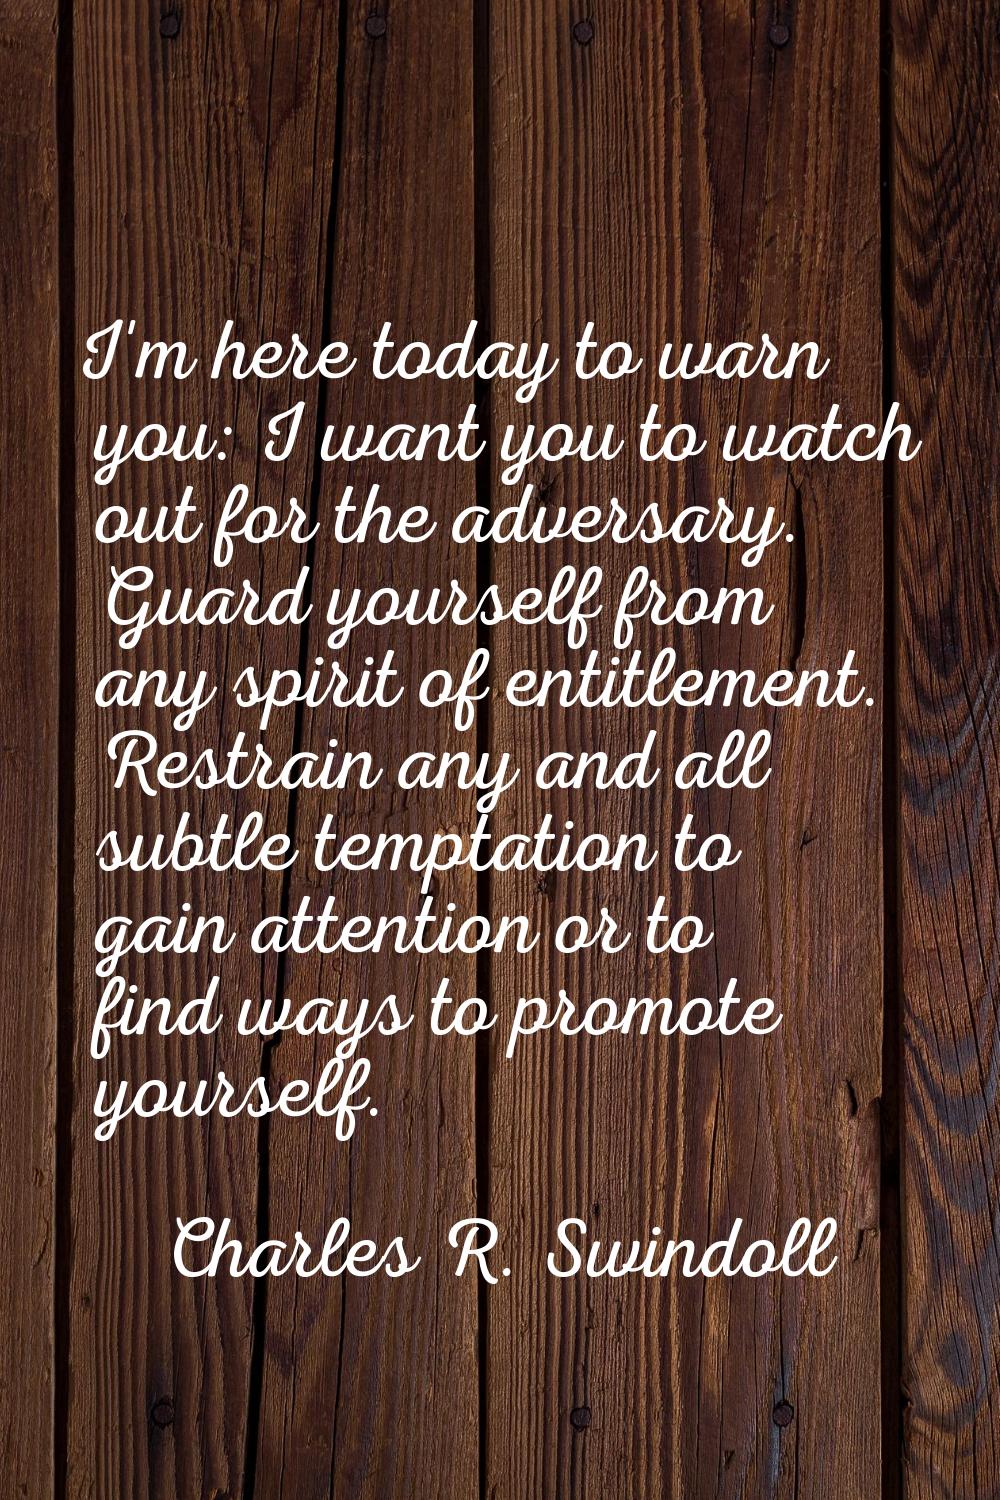 I'm here today to warn you: I want you to watch out for the adversary. Guard yourself from any spir